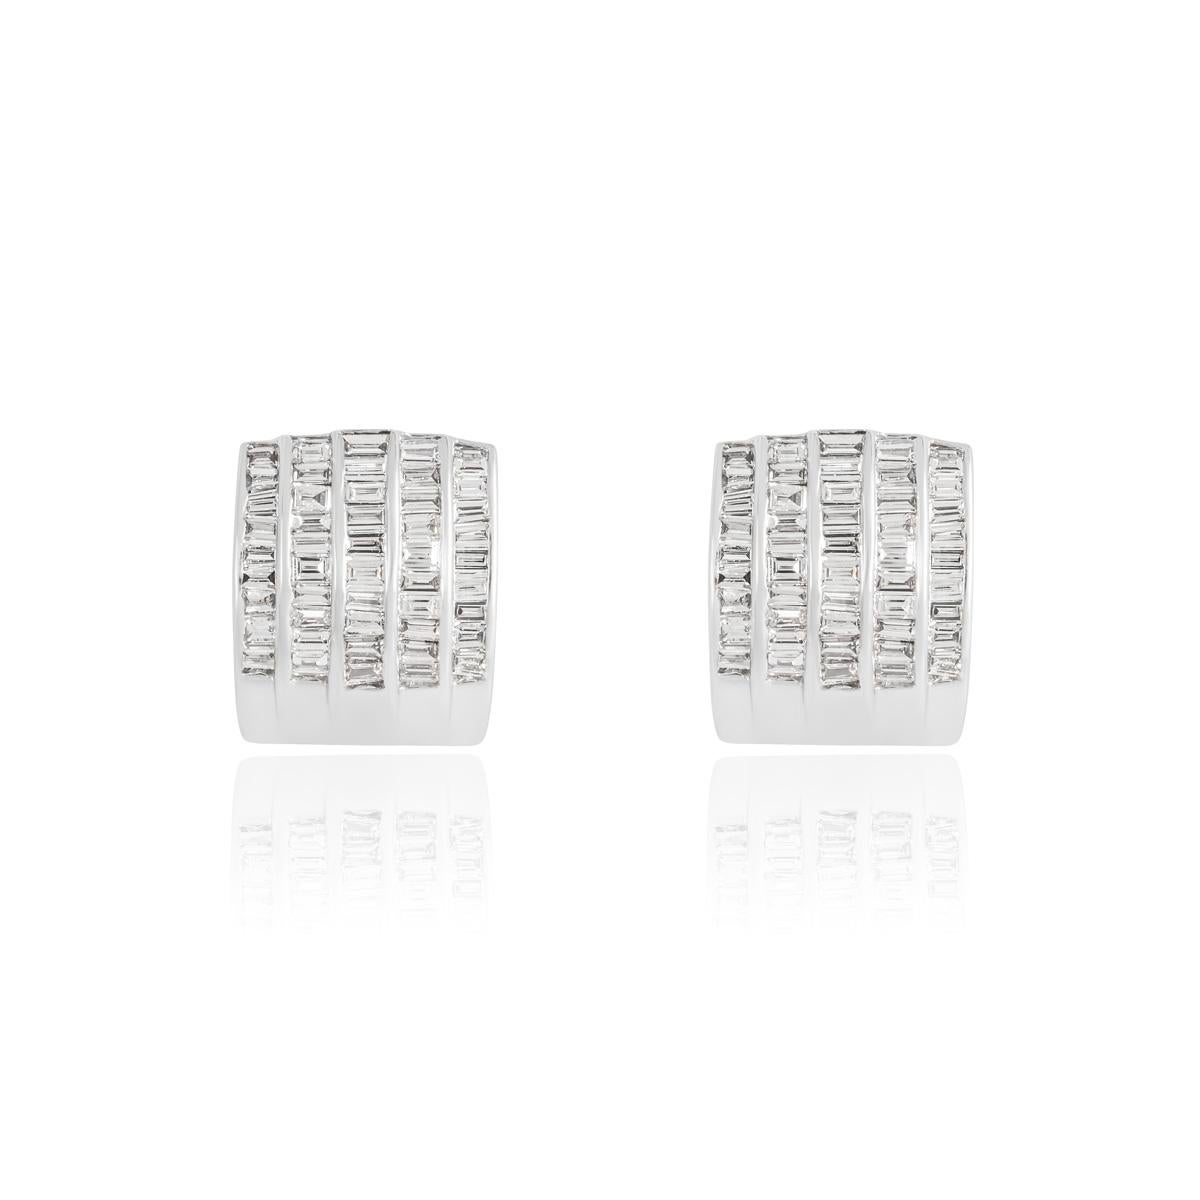 A gorgeous 18k white gold diamond pendant and earrings suite. The pendant features 5 columns channel set with 50 baguette cut diamonds and matching earrings that are each set with 48 baguette cut diamonds with a total weight of 3.70ct, G-H colour